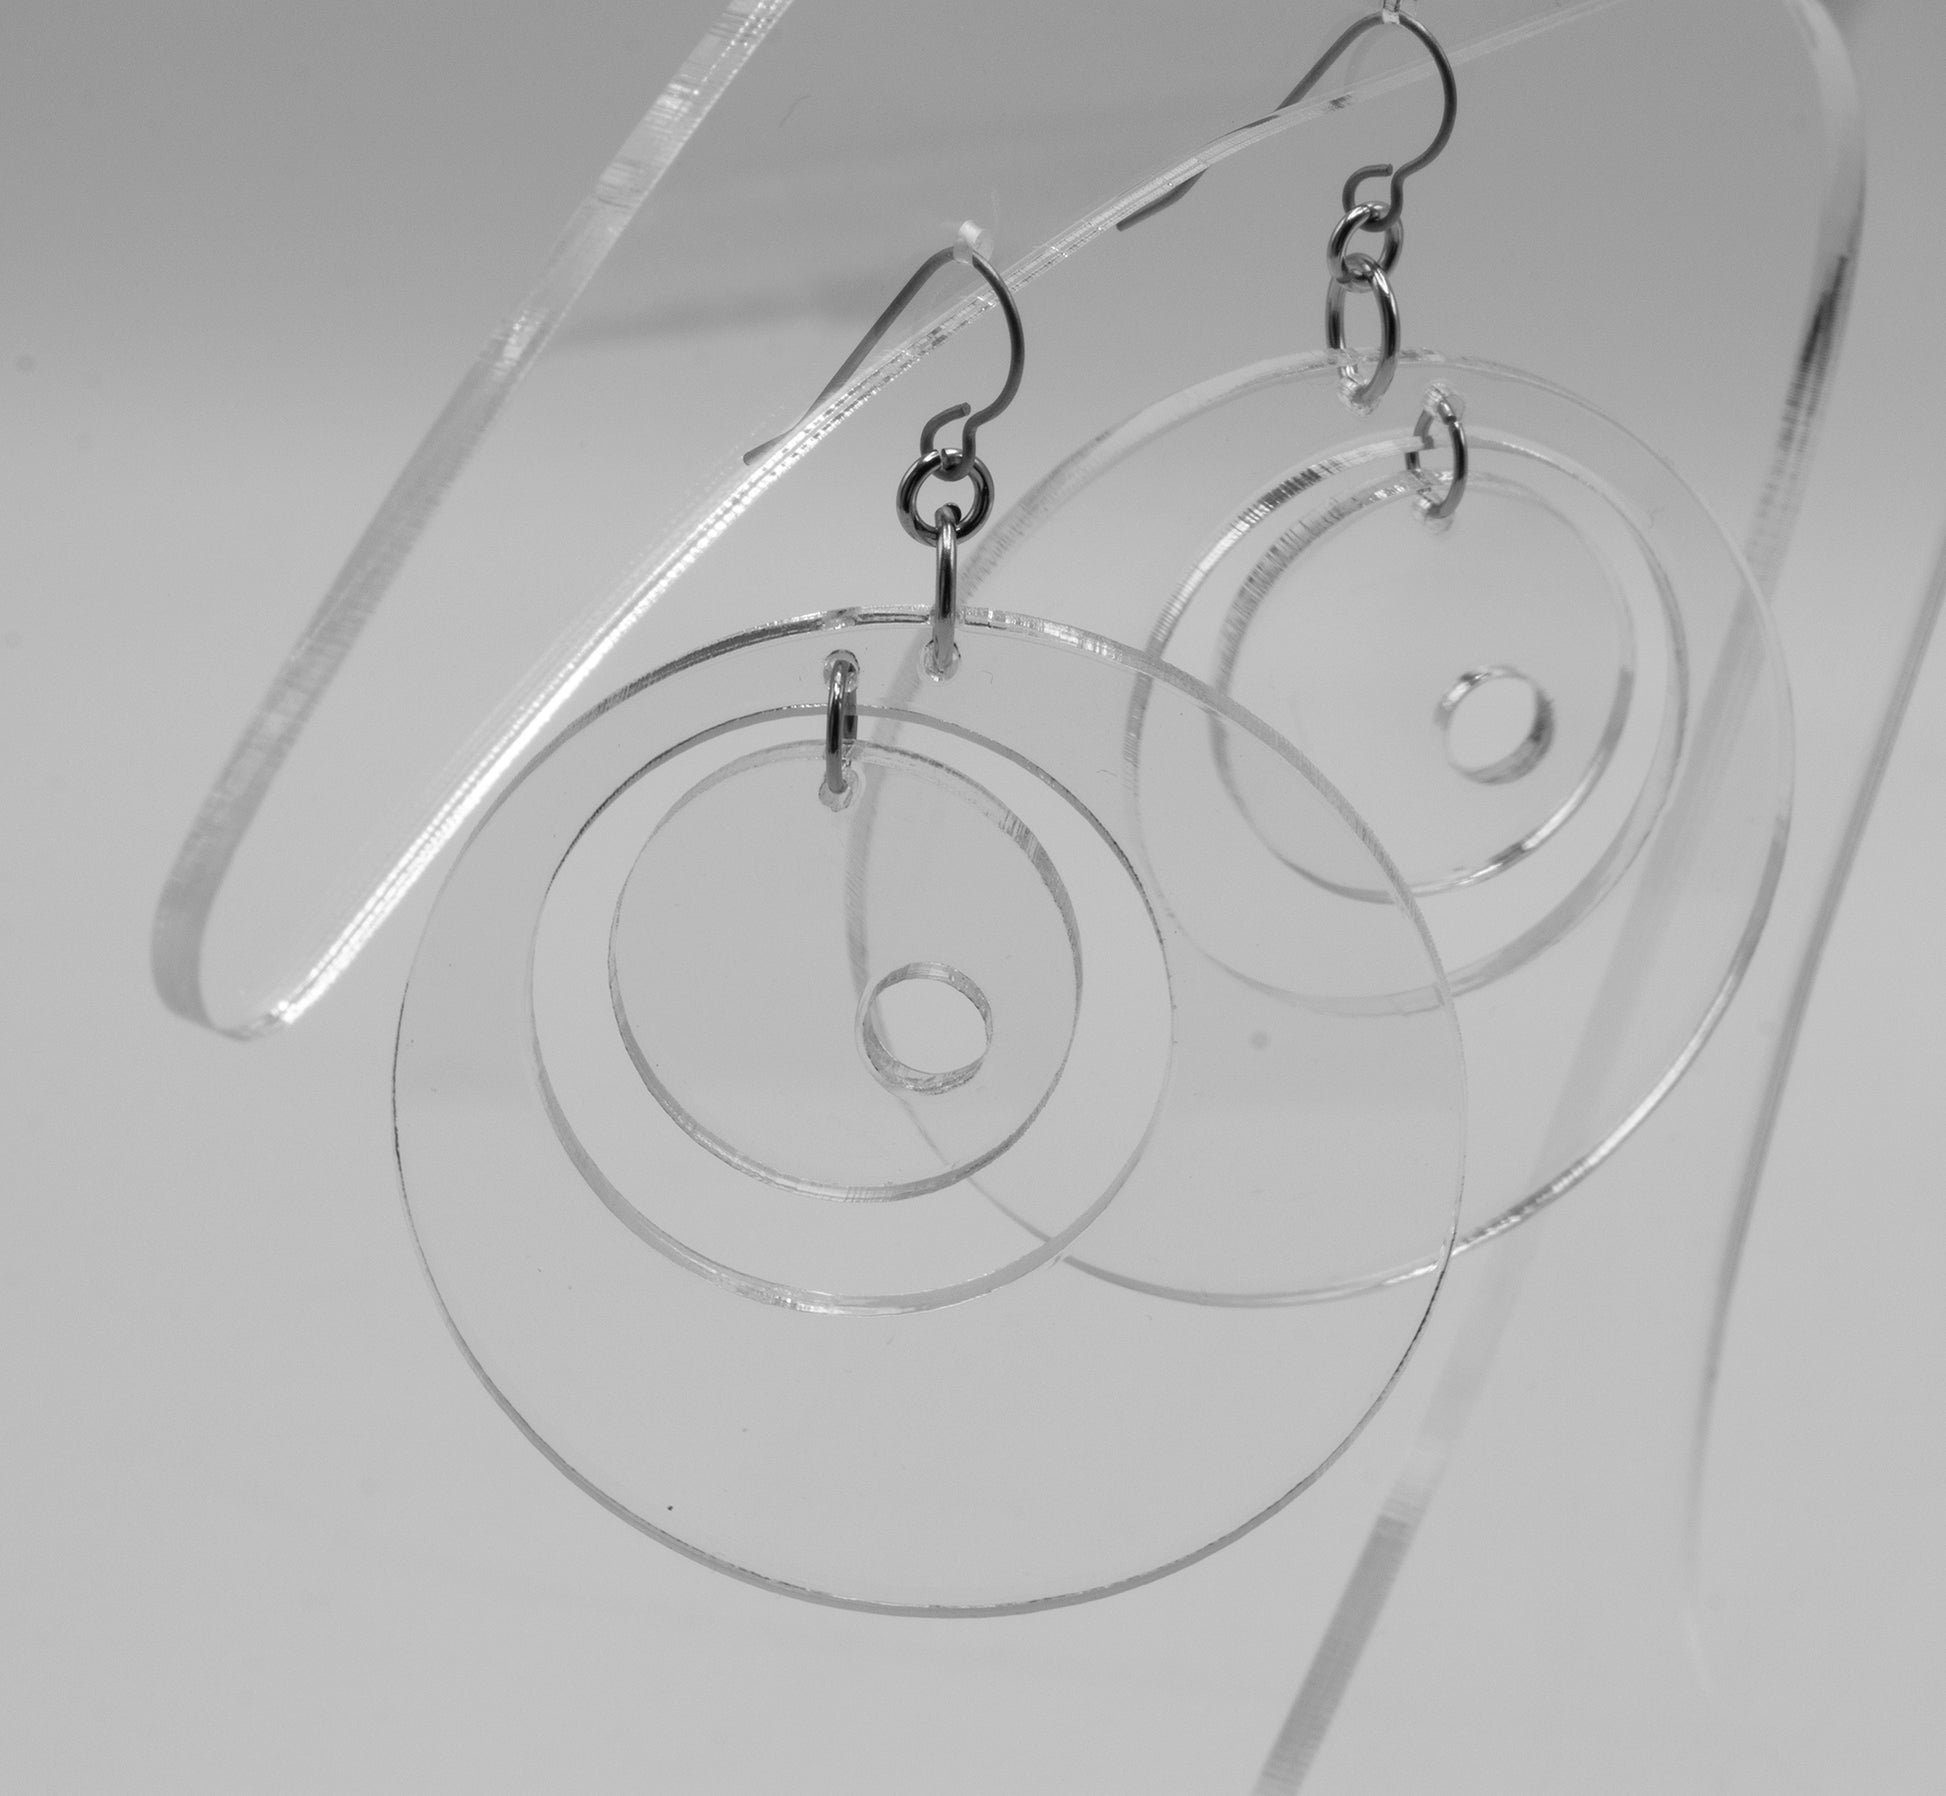 MODular Earrings - Groovy Statement Earrings in Clear Acrylic by AtomicMobiles.com - retro era inspired mod handmade jewelry